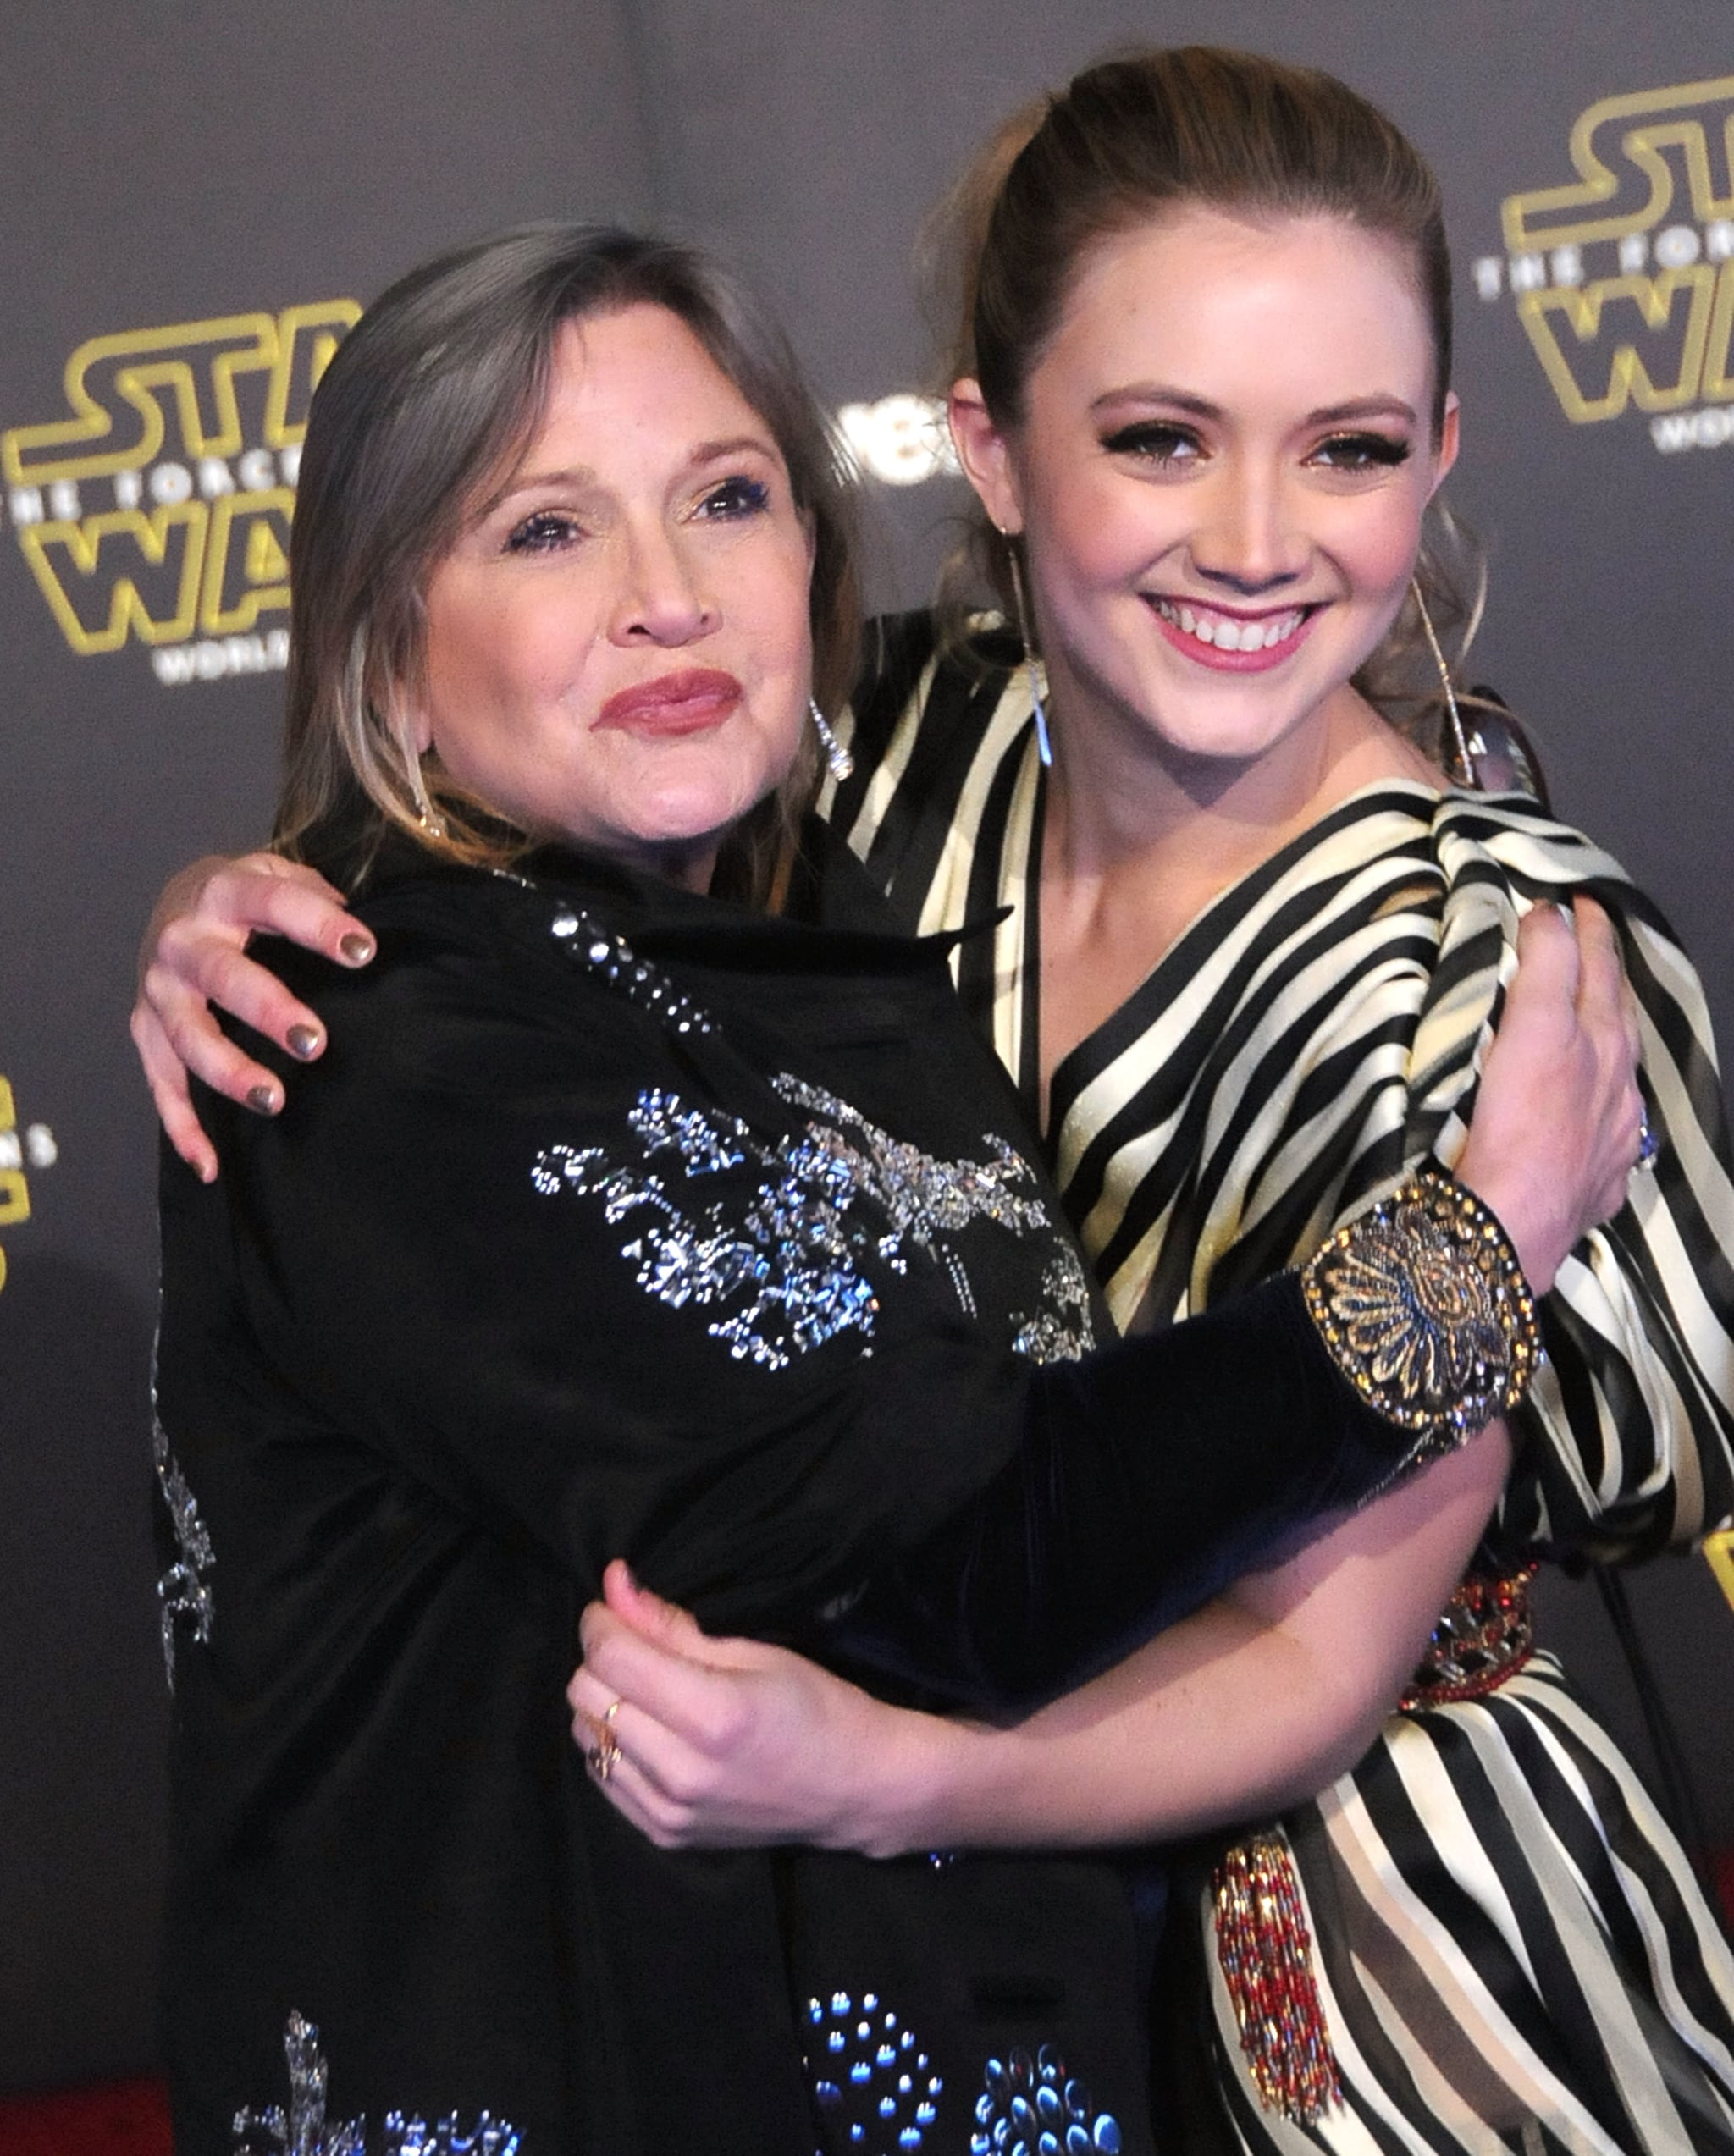 HOLLYWOOD, CA - DECEMBER 14:  (L-R) Actress Carrie Fisher and daughter actress Billie Lourd attend the Premiere of Walt Disney Pictures and Lucasfilm's 'Star Wars: The Force Awakens' on December 14, 2015 in Hollywood, California.  (Photo by Barry King/WireImage)